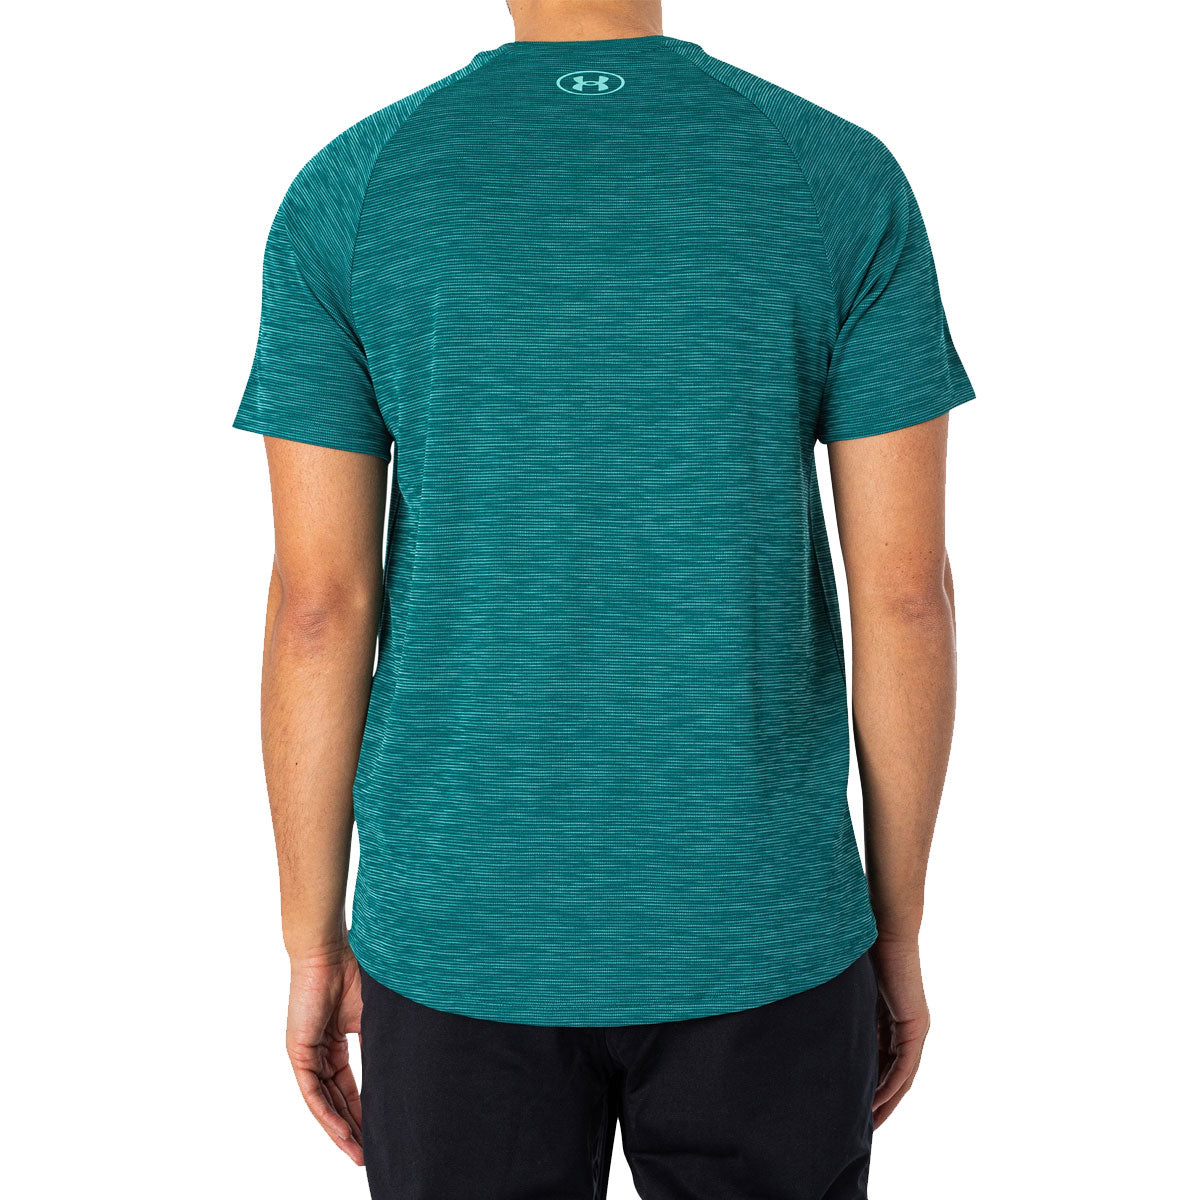 Under Armour Tech Textured Short Sleeve Tee - Mens - Hydro Teal/Radial Turquoise